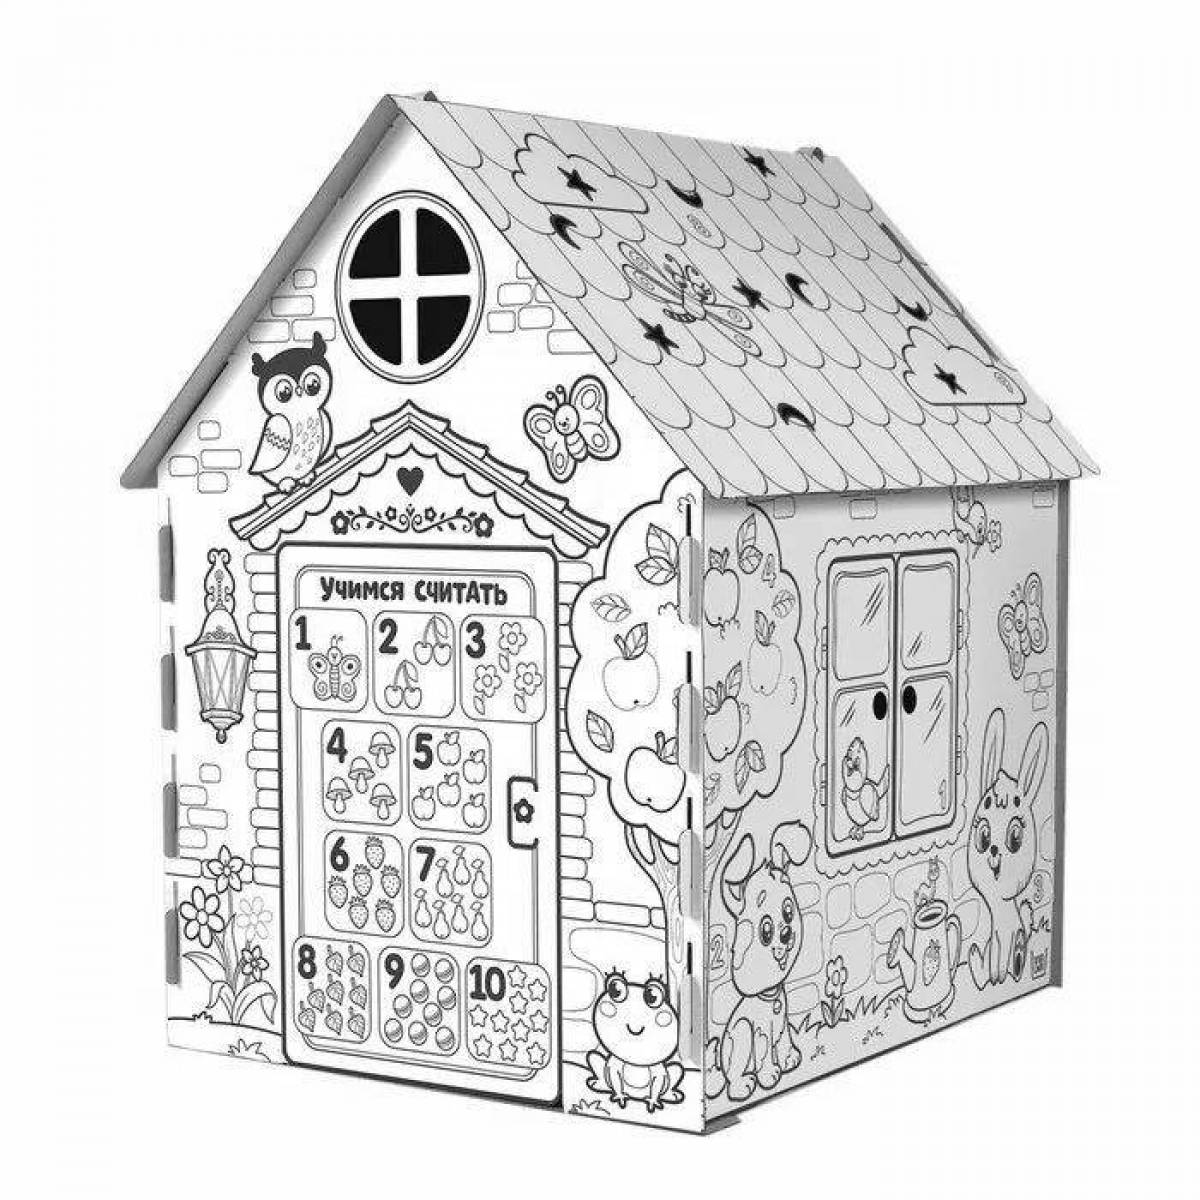 Coloring page adorable cardboard house for preschoolers